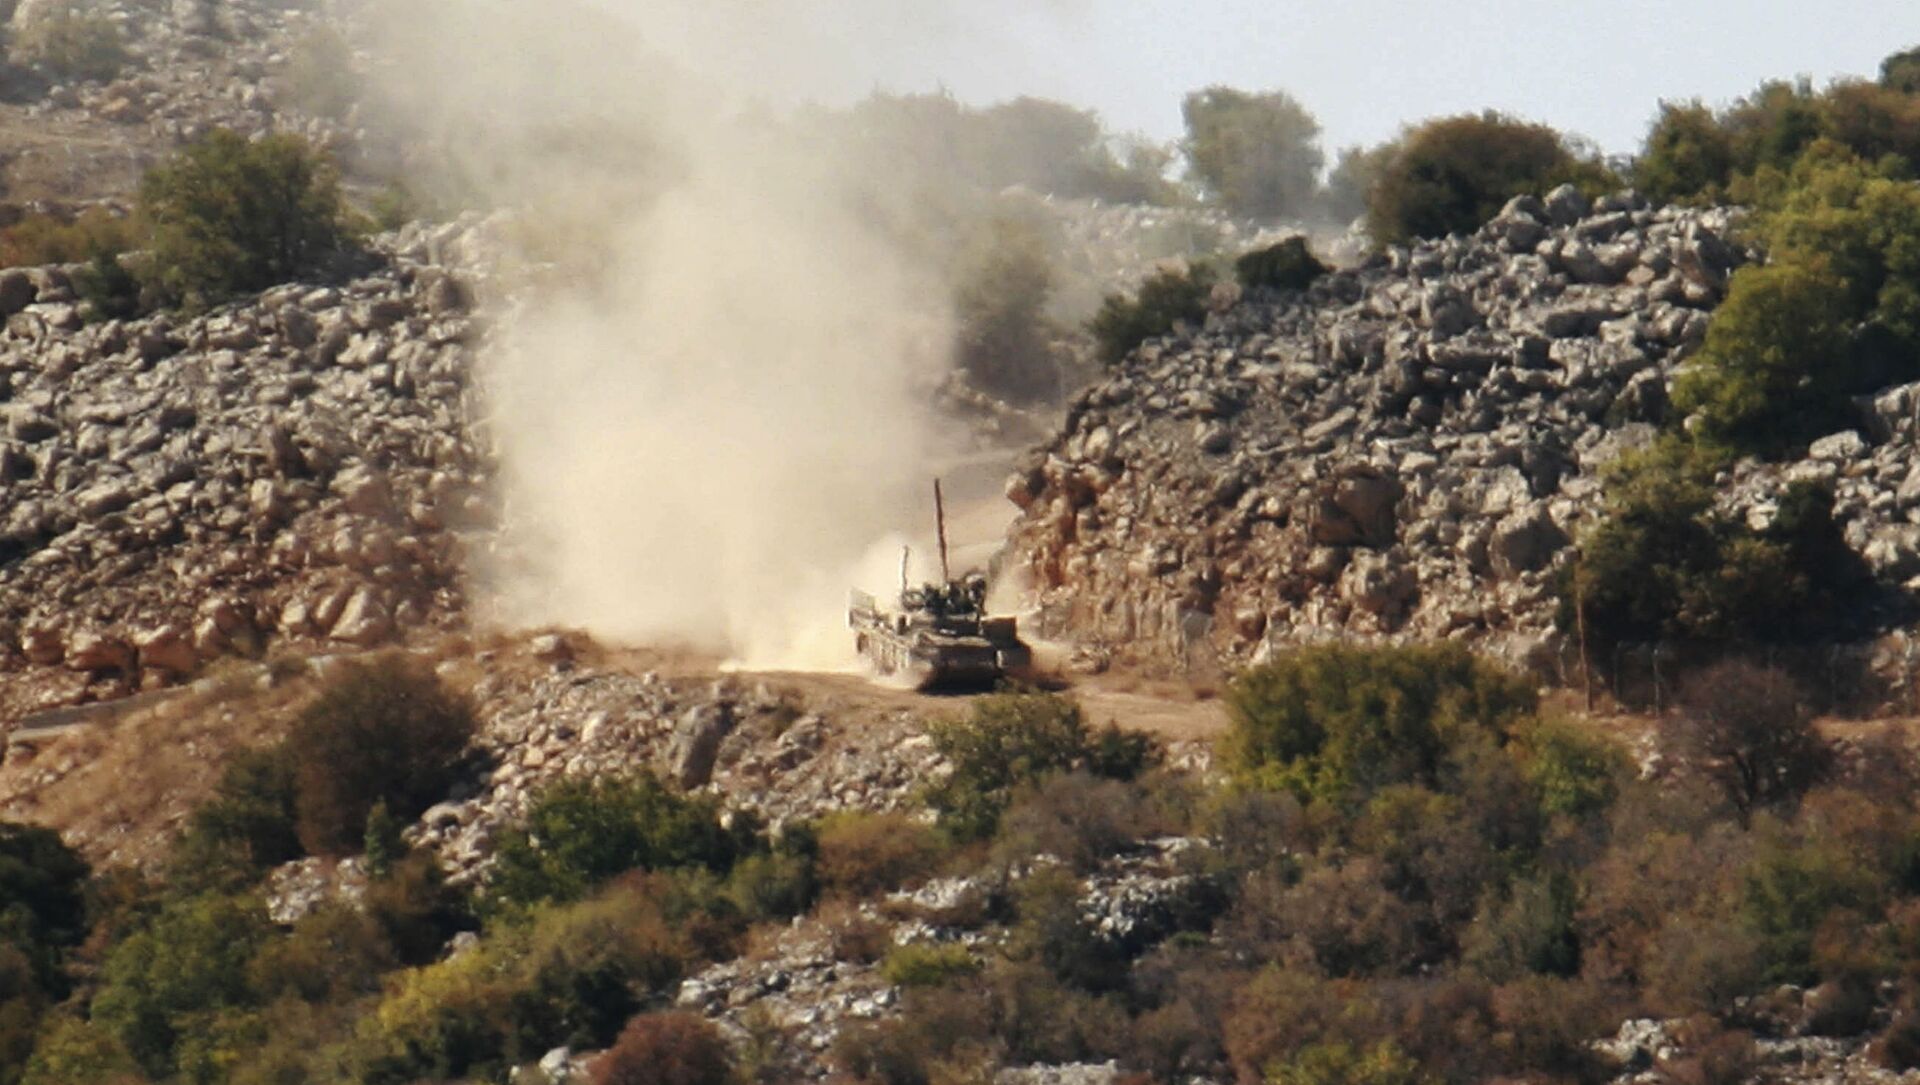  An Israeli army tank patrols during an investigation by the U.N. peacekeepers and Lebanese army soldiers near the site where Hezbollah attacked on Tuesday an Israeli patrol, in the hills of Kfar Shouba village, near the Israeli-occupied Shebaa farms, southern Lebanon, on Wednesday Oct. 8, 2014. Israel fired toward Hezbollah positions in southern Lebanon on Tuesday after the Shiite guerrillas set off an explosion along the tense border that wounded at least two Israeli soldiers, in the most serious incident between the two countries in months. Hezbollah issued a statement on the group’s Al Manar TV station claiming responsibility for the blast in Shebaa on Tuesday, saying it targeted an Israeli patrol - 俄罗斯卫星通讯社, 1920, 06.08.2021